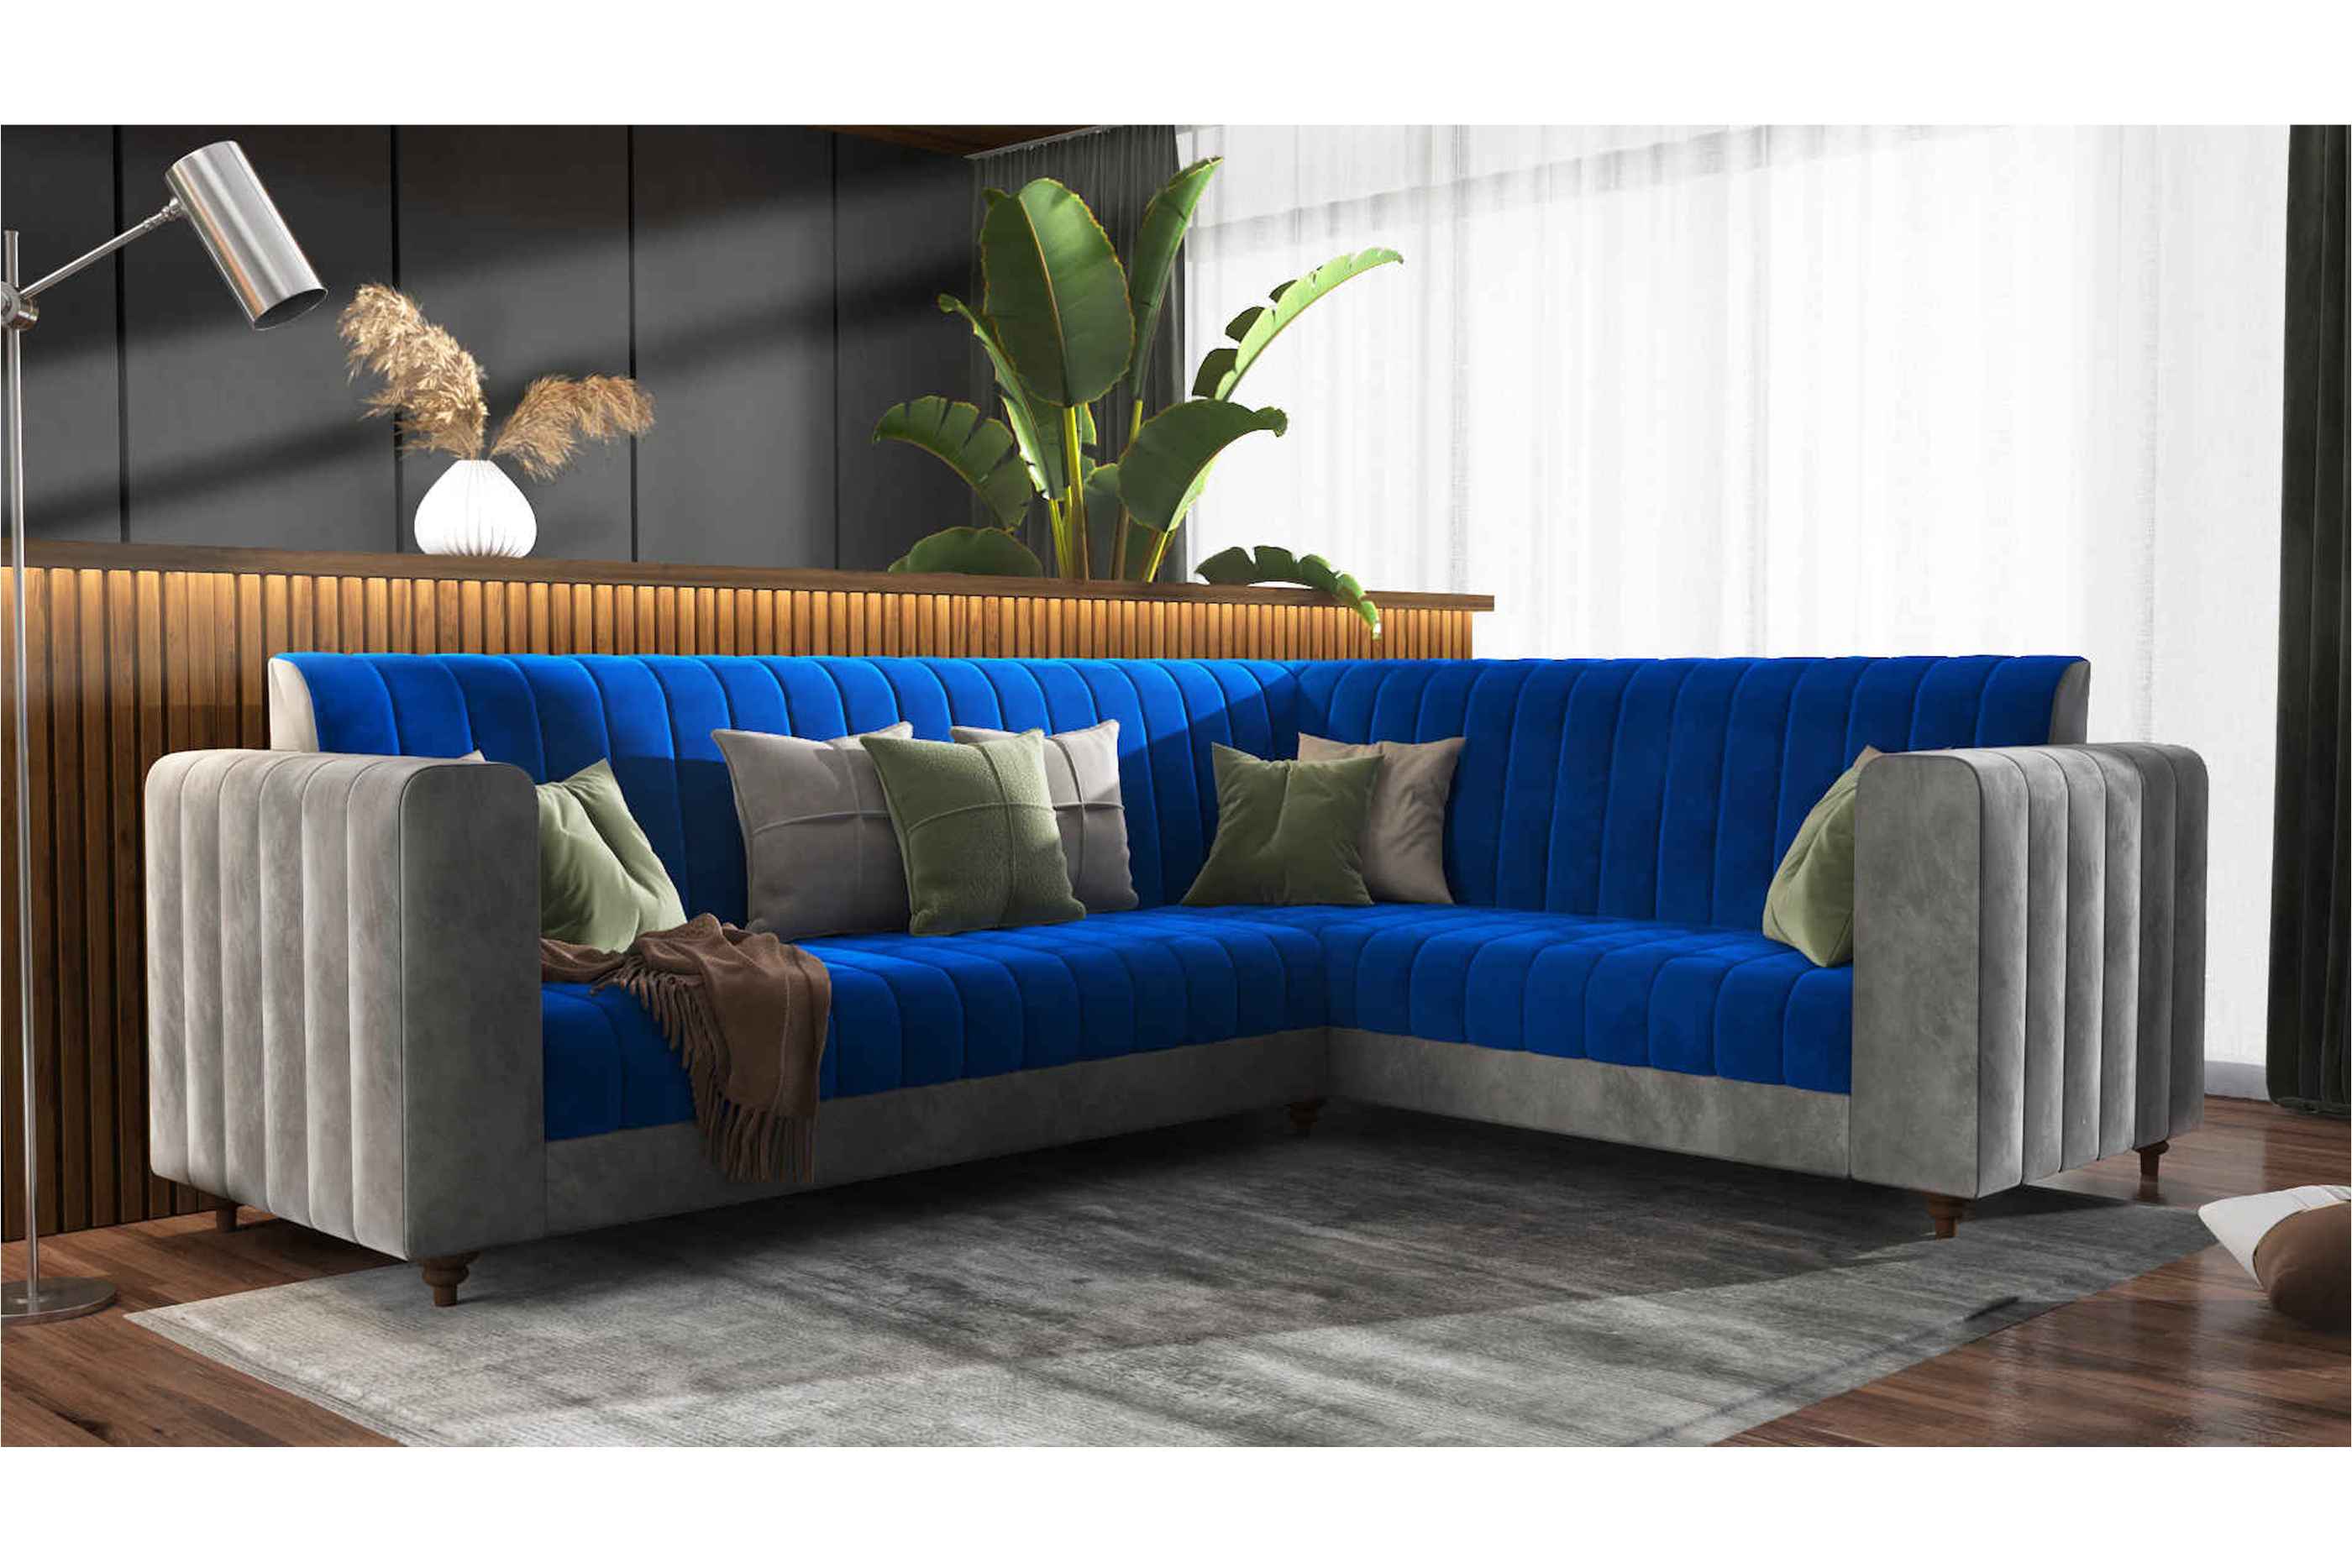 Wooden Space 7 Seater Tokyo Sofa